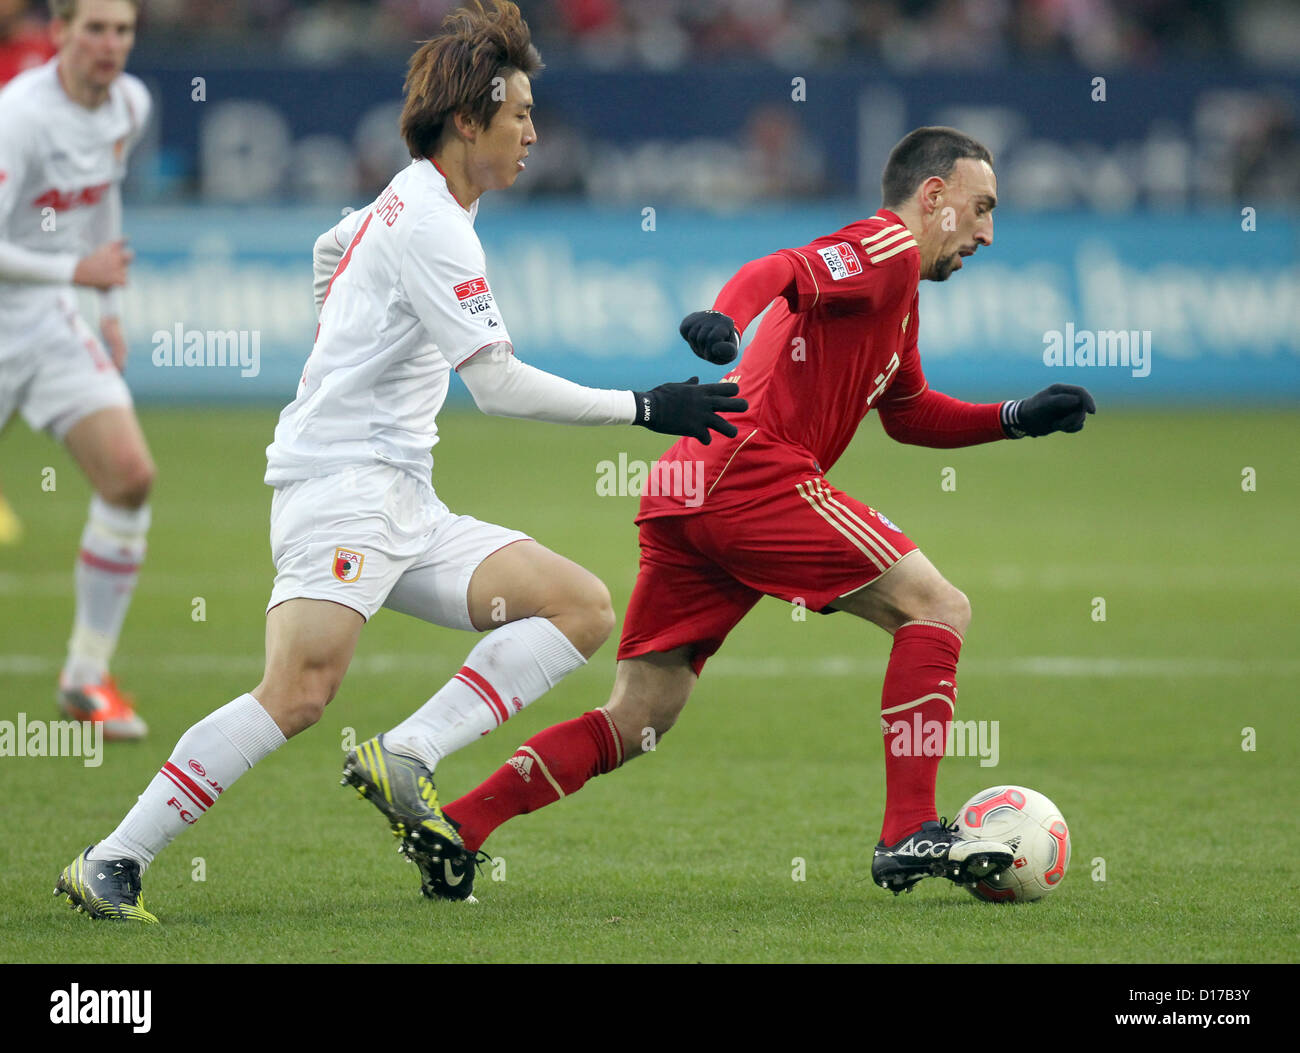 Augsburg's Ja-Cheol Koo (L) vies ball with Munich's Franck Ribery during Bundesliga soccer match between FC Augsburg Bayern Munich SGL Arena in Augsburg Germany 08 December 2012 Augsburg's Kevin Vogt (L) looks on Photo: KARL-JOSEF HILDENBRAND (ATTENTION: EMBARGO CONDITIONS! DFL permits further utilisation up 15 pictures only (no sequntial pictures or video-similar series pictures allowed) via internet online media during match (including halftime) taken inside stadium and/or prior start match DFL permits unrestricted transmission digitised recordings during match exclusively internal Stock Photo